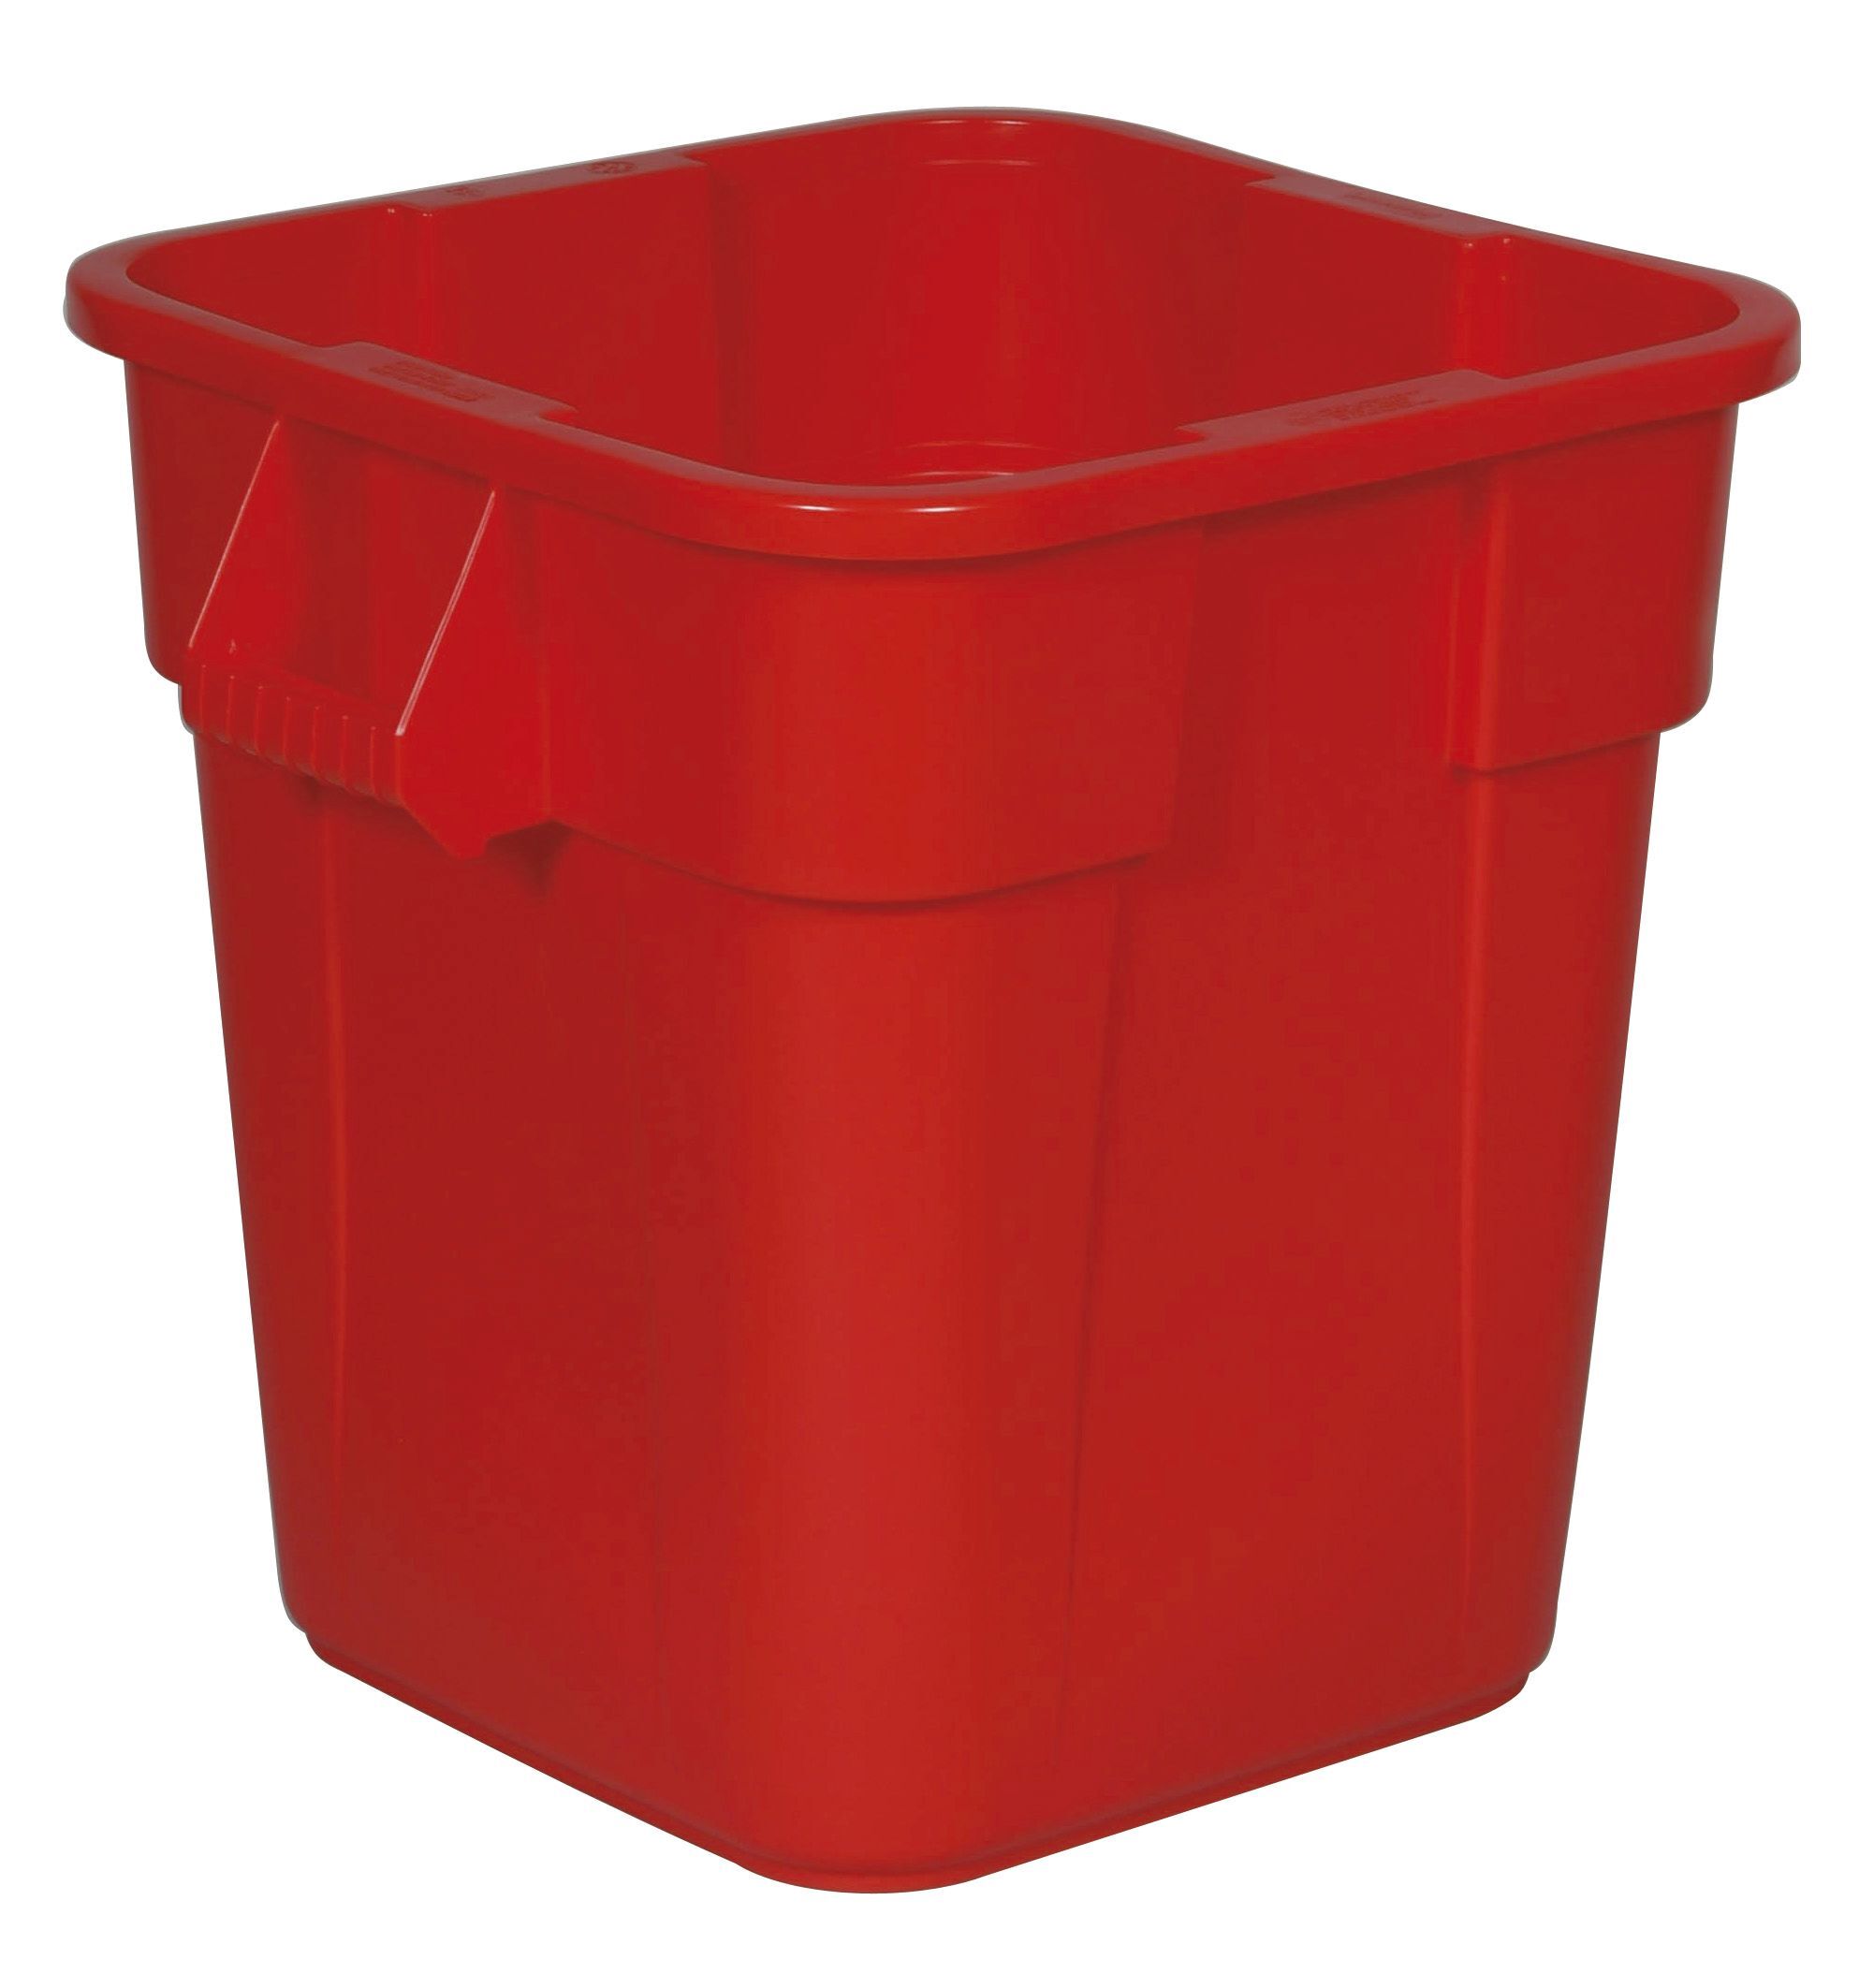 Rubbermaid Vierkante Brute container 106 ltr, Rubbermaid, model: VB 003526, rood